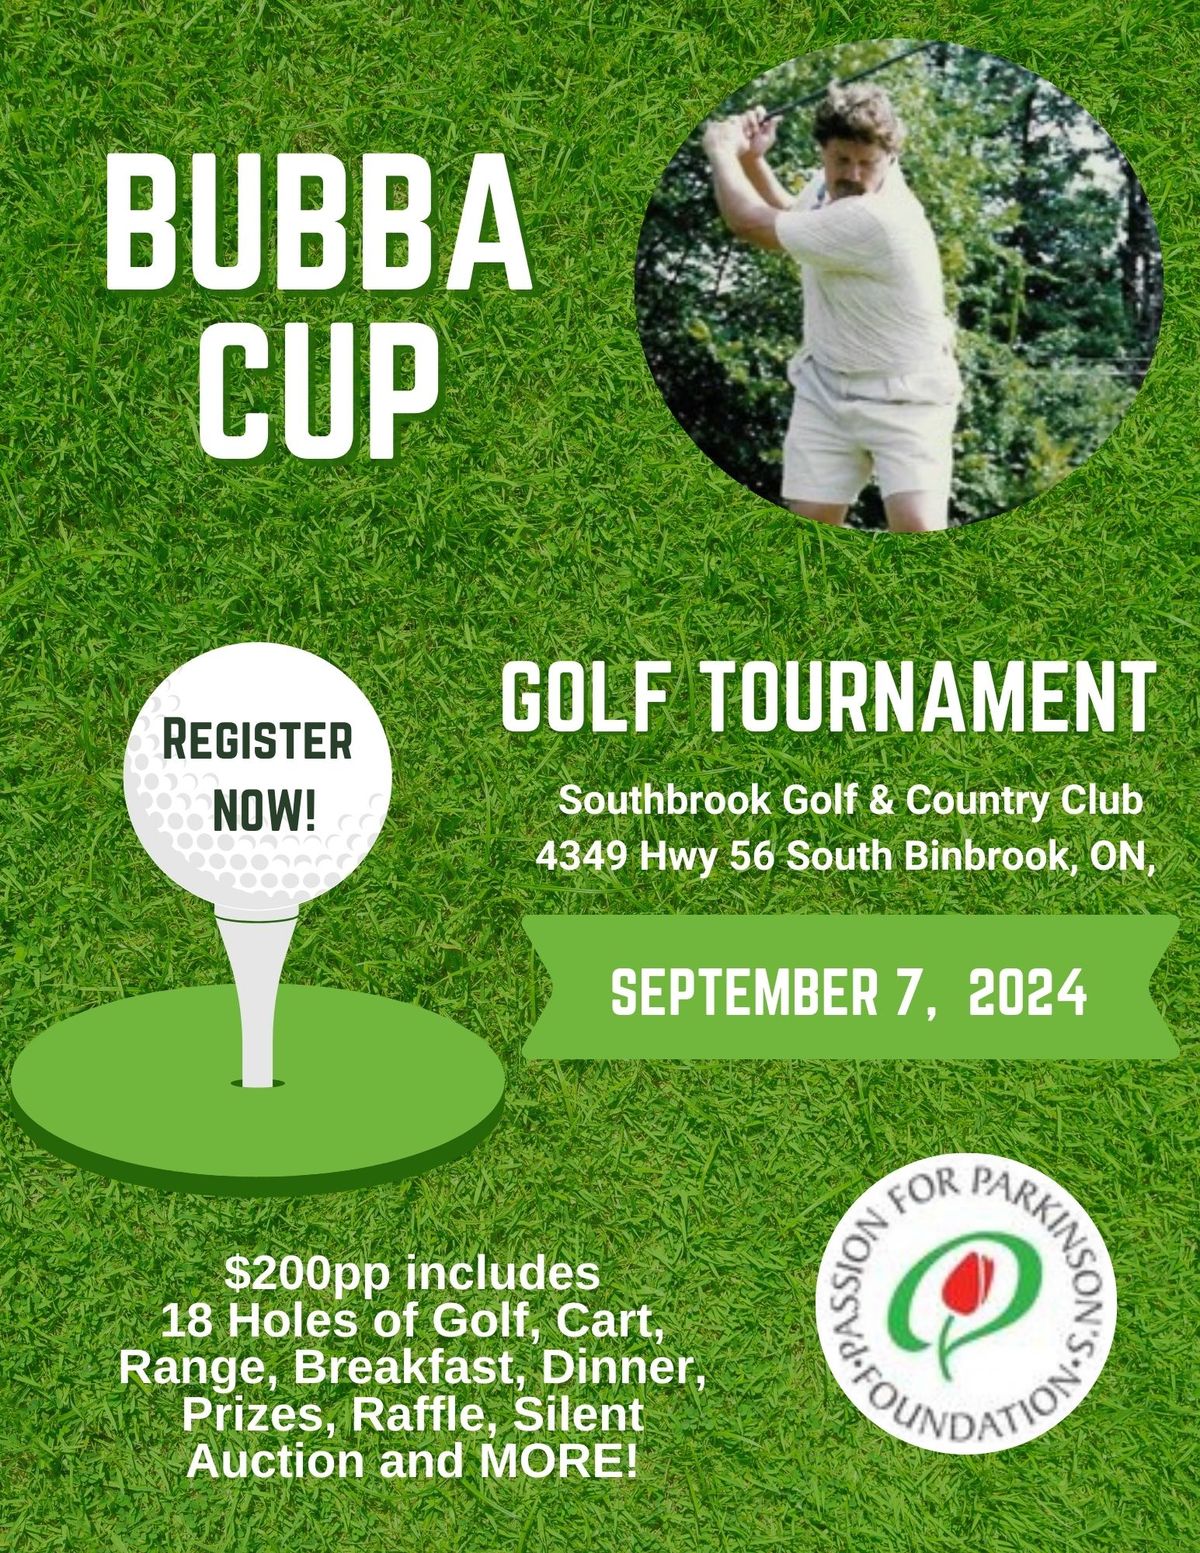 5th Annual Bubba Cup Golf Tournament - Southbrook Golf and Country Club